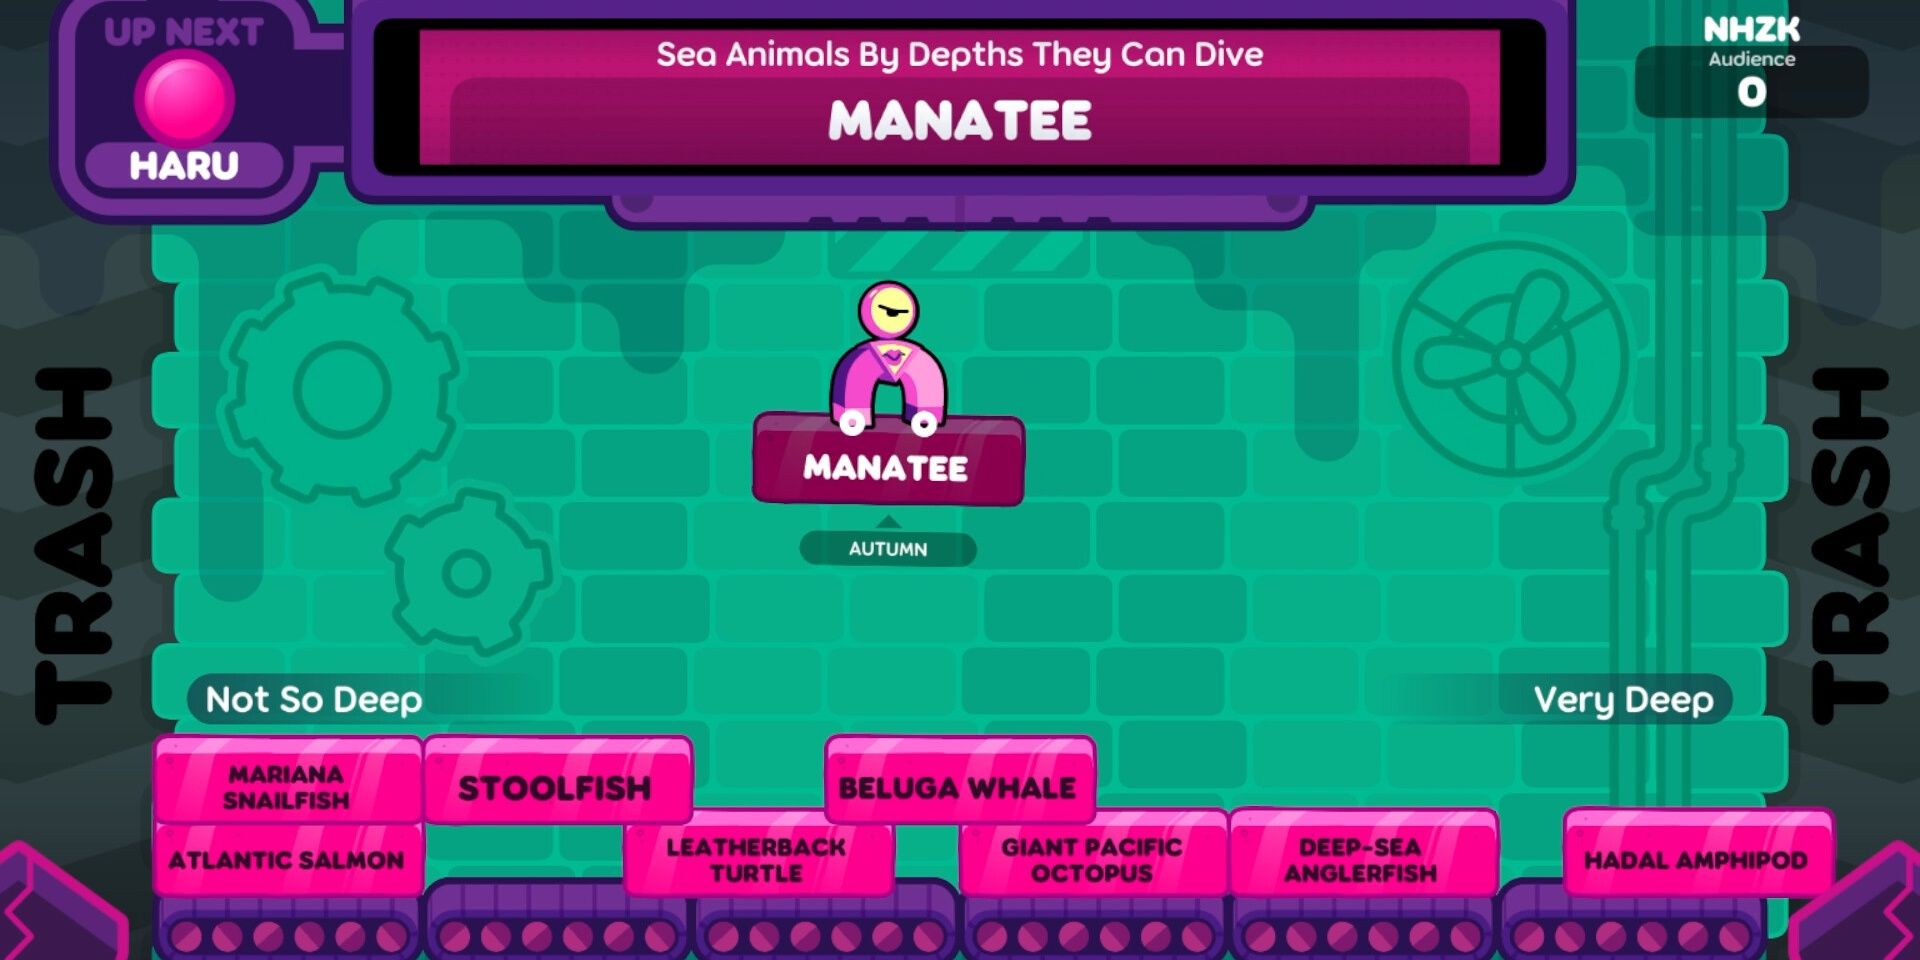 A player sorting "Manatee" into "Sea Animals By Depths They Can Dive" in Quixort